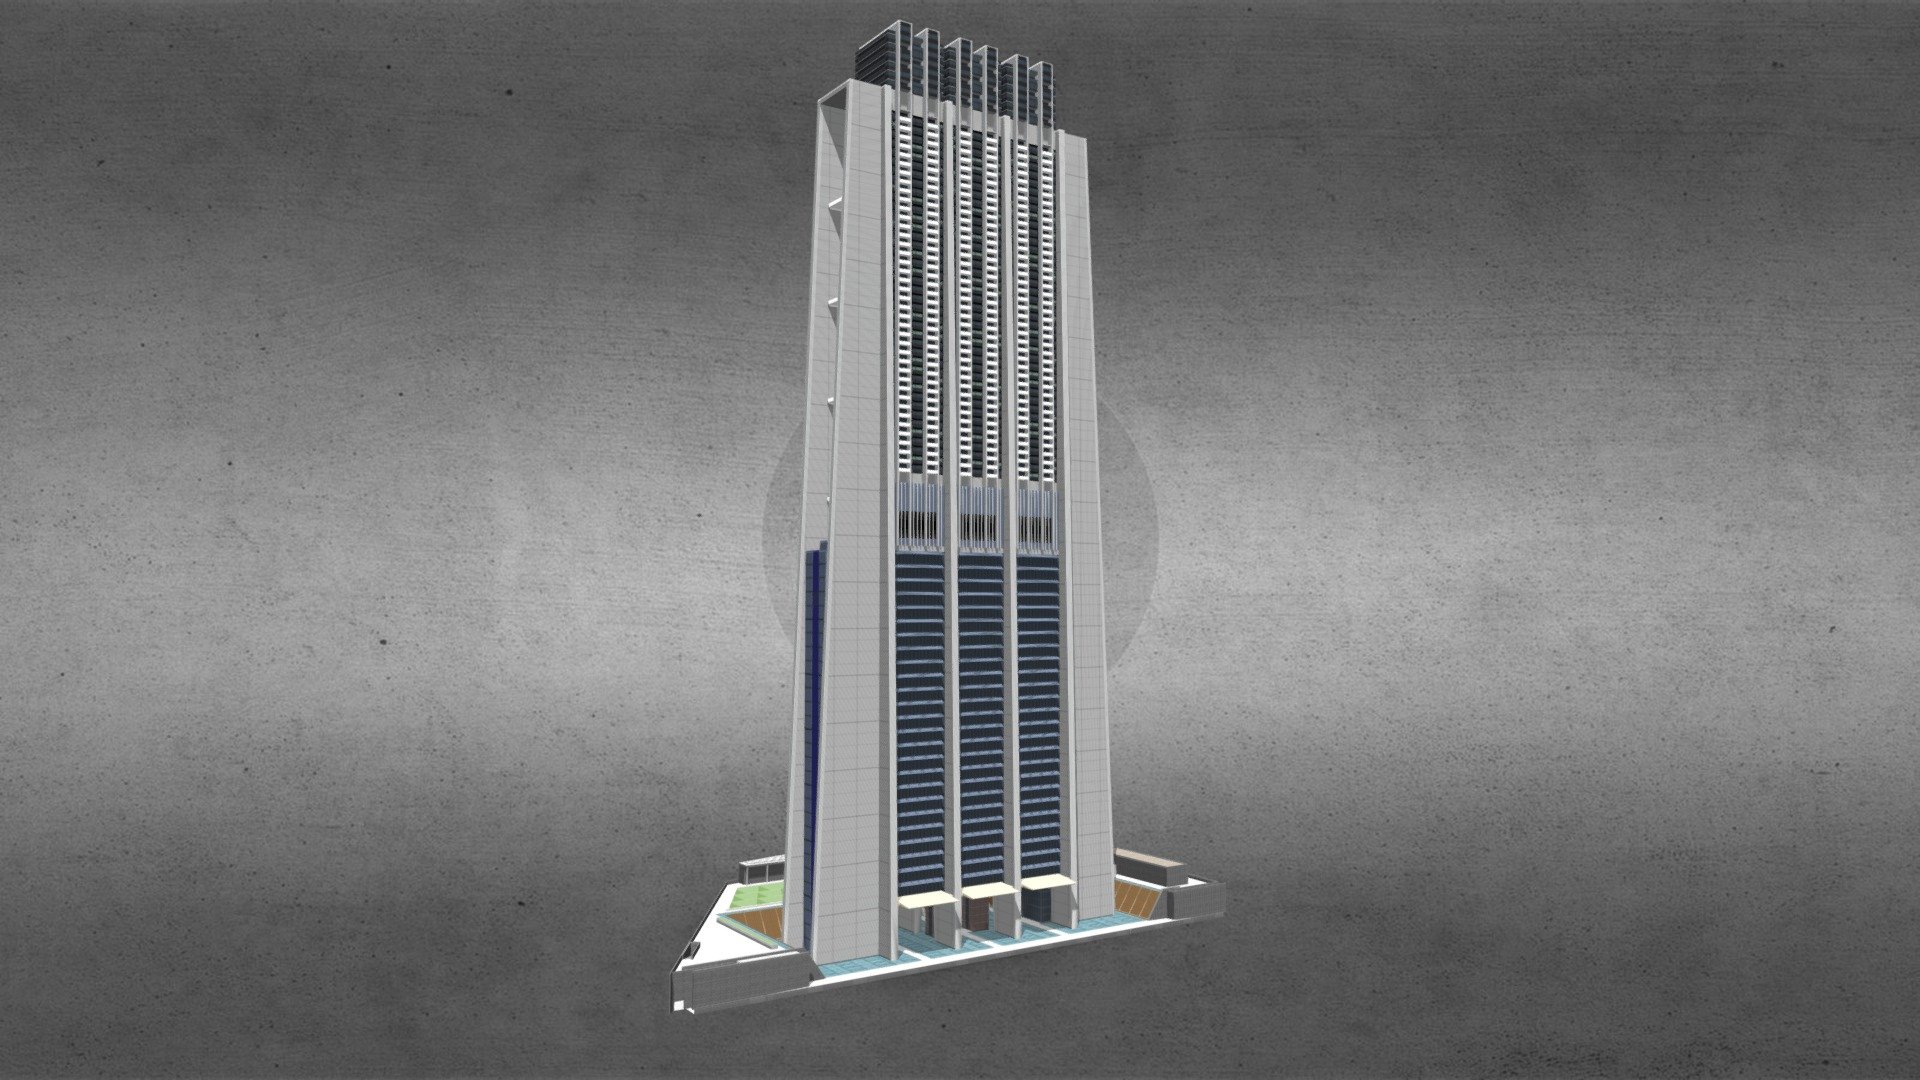 Index Tower - Dubai

The Index is a skyscraper situated in Dubai.
This high rise contains 25 floors of offices(desks) and 47 floors of apartments for a total height of 328 meters

Created and especialy adapted for the game &ldquo;Cities Skylines